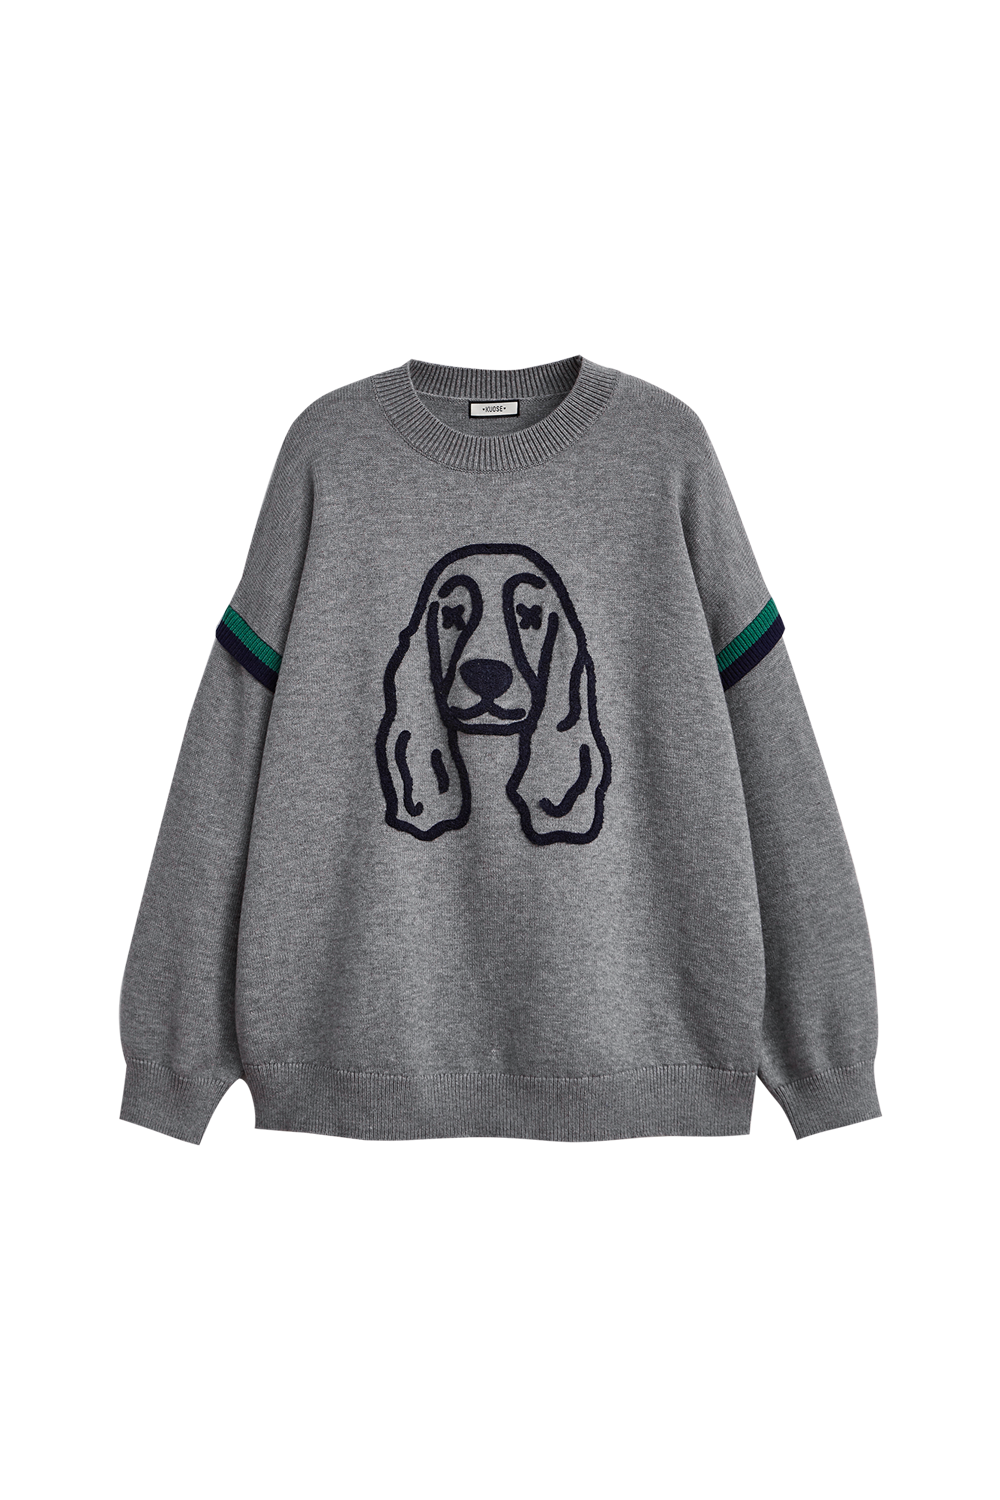 Cartoon pattern sweater loose and casual round neck design knitted sweater